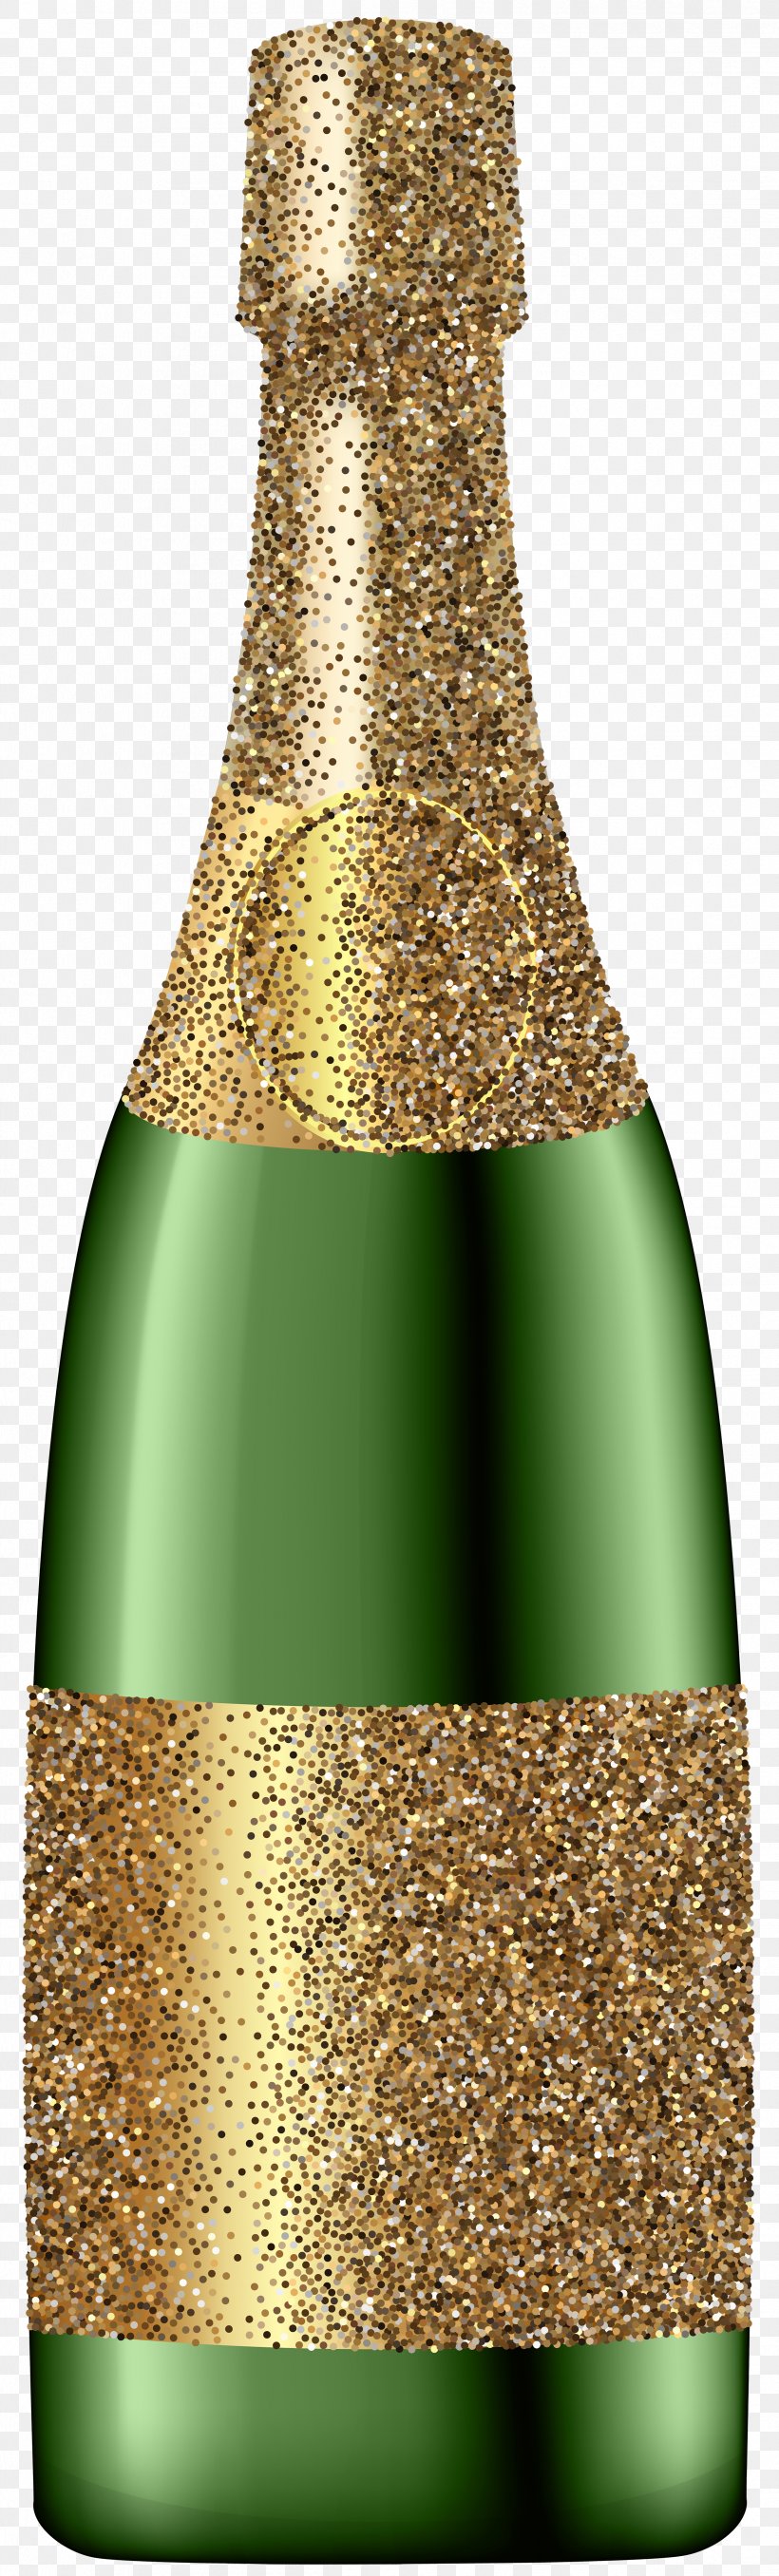 Champagne Cocktail Bottle Sparkling Wine Clip Art, PNG, 2418x8000px, Champagne, Beer Bottle, Bottle, Champagne Cocktail, Champagne Glass Download Free